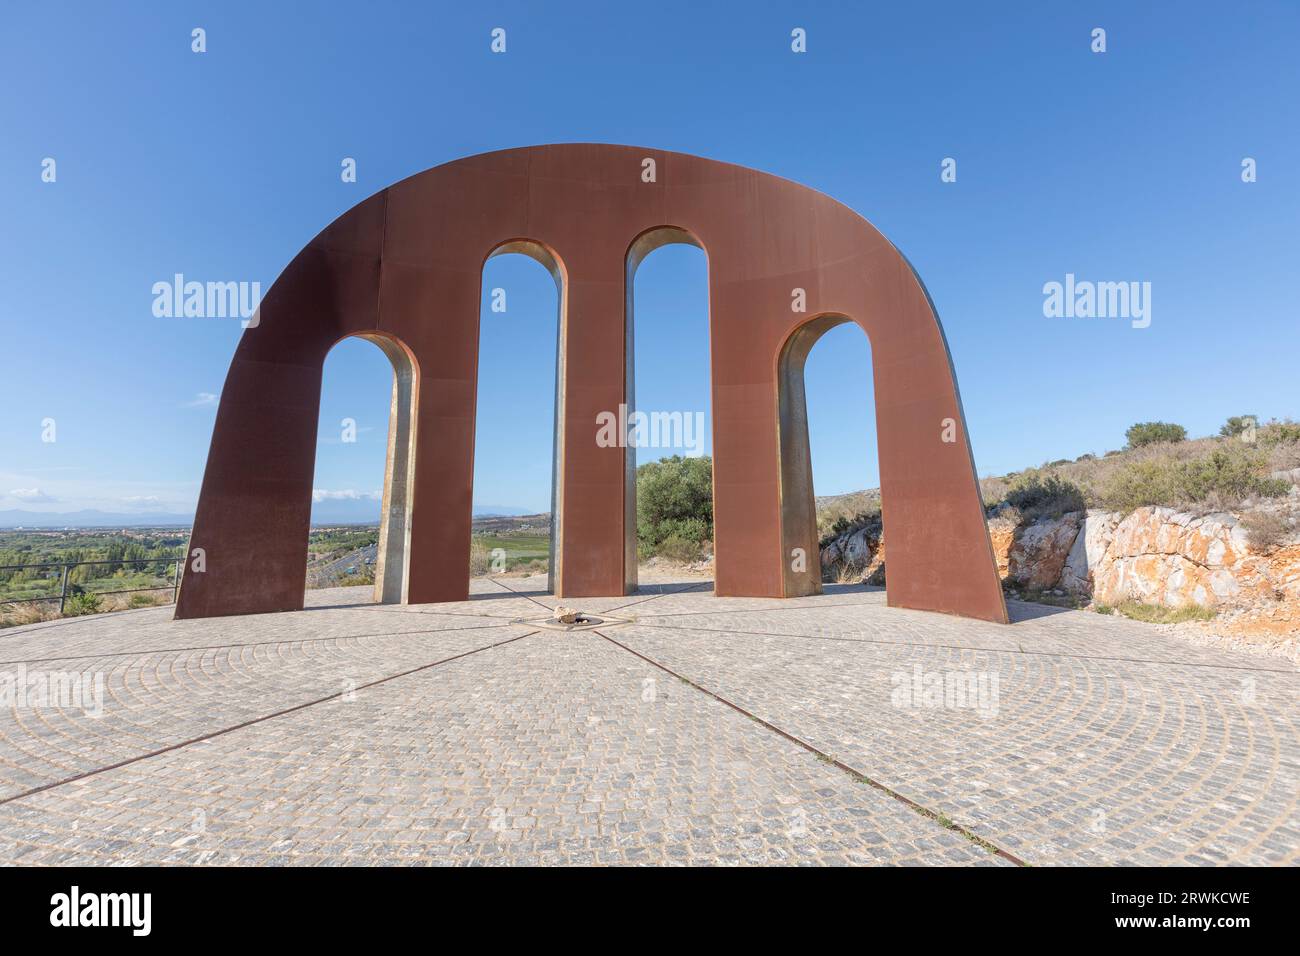 The Gate of the Catalan Countries is a work of the sculptor Emili Armengol, and marks the Northern starting location of the Catalan Countries. Stock Photo